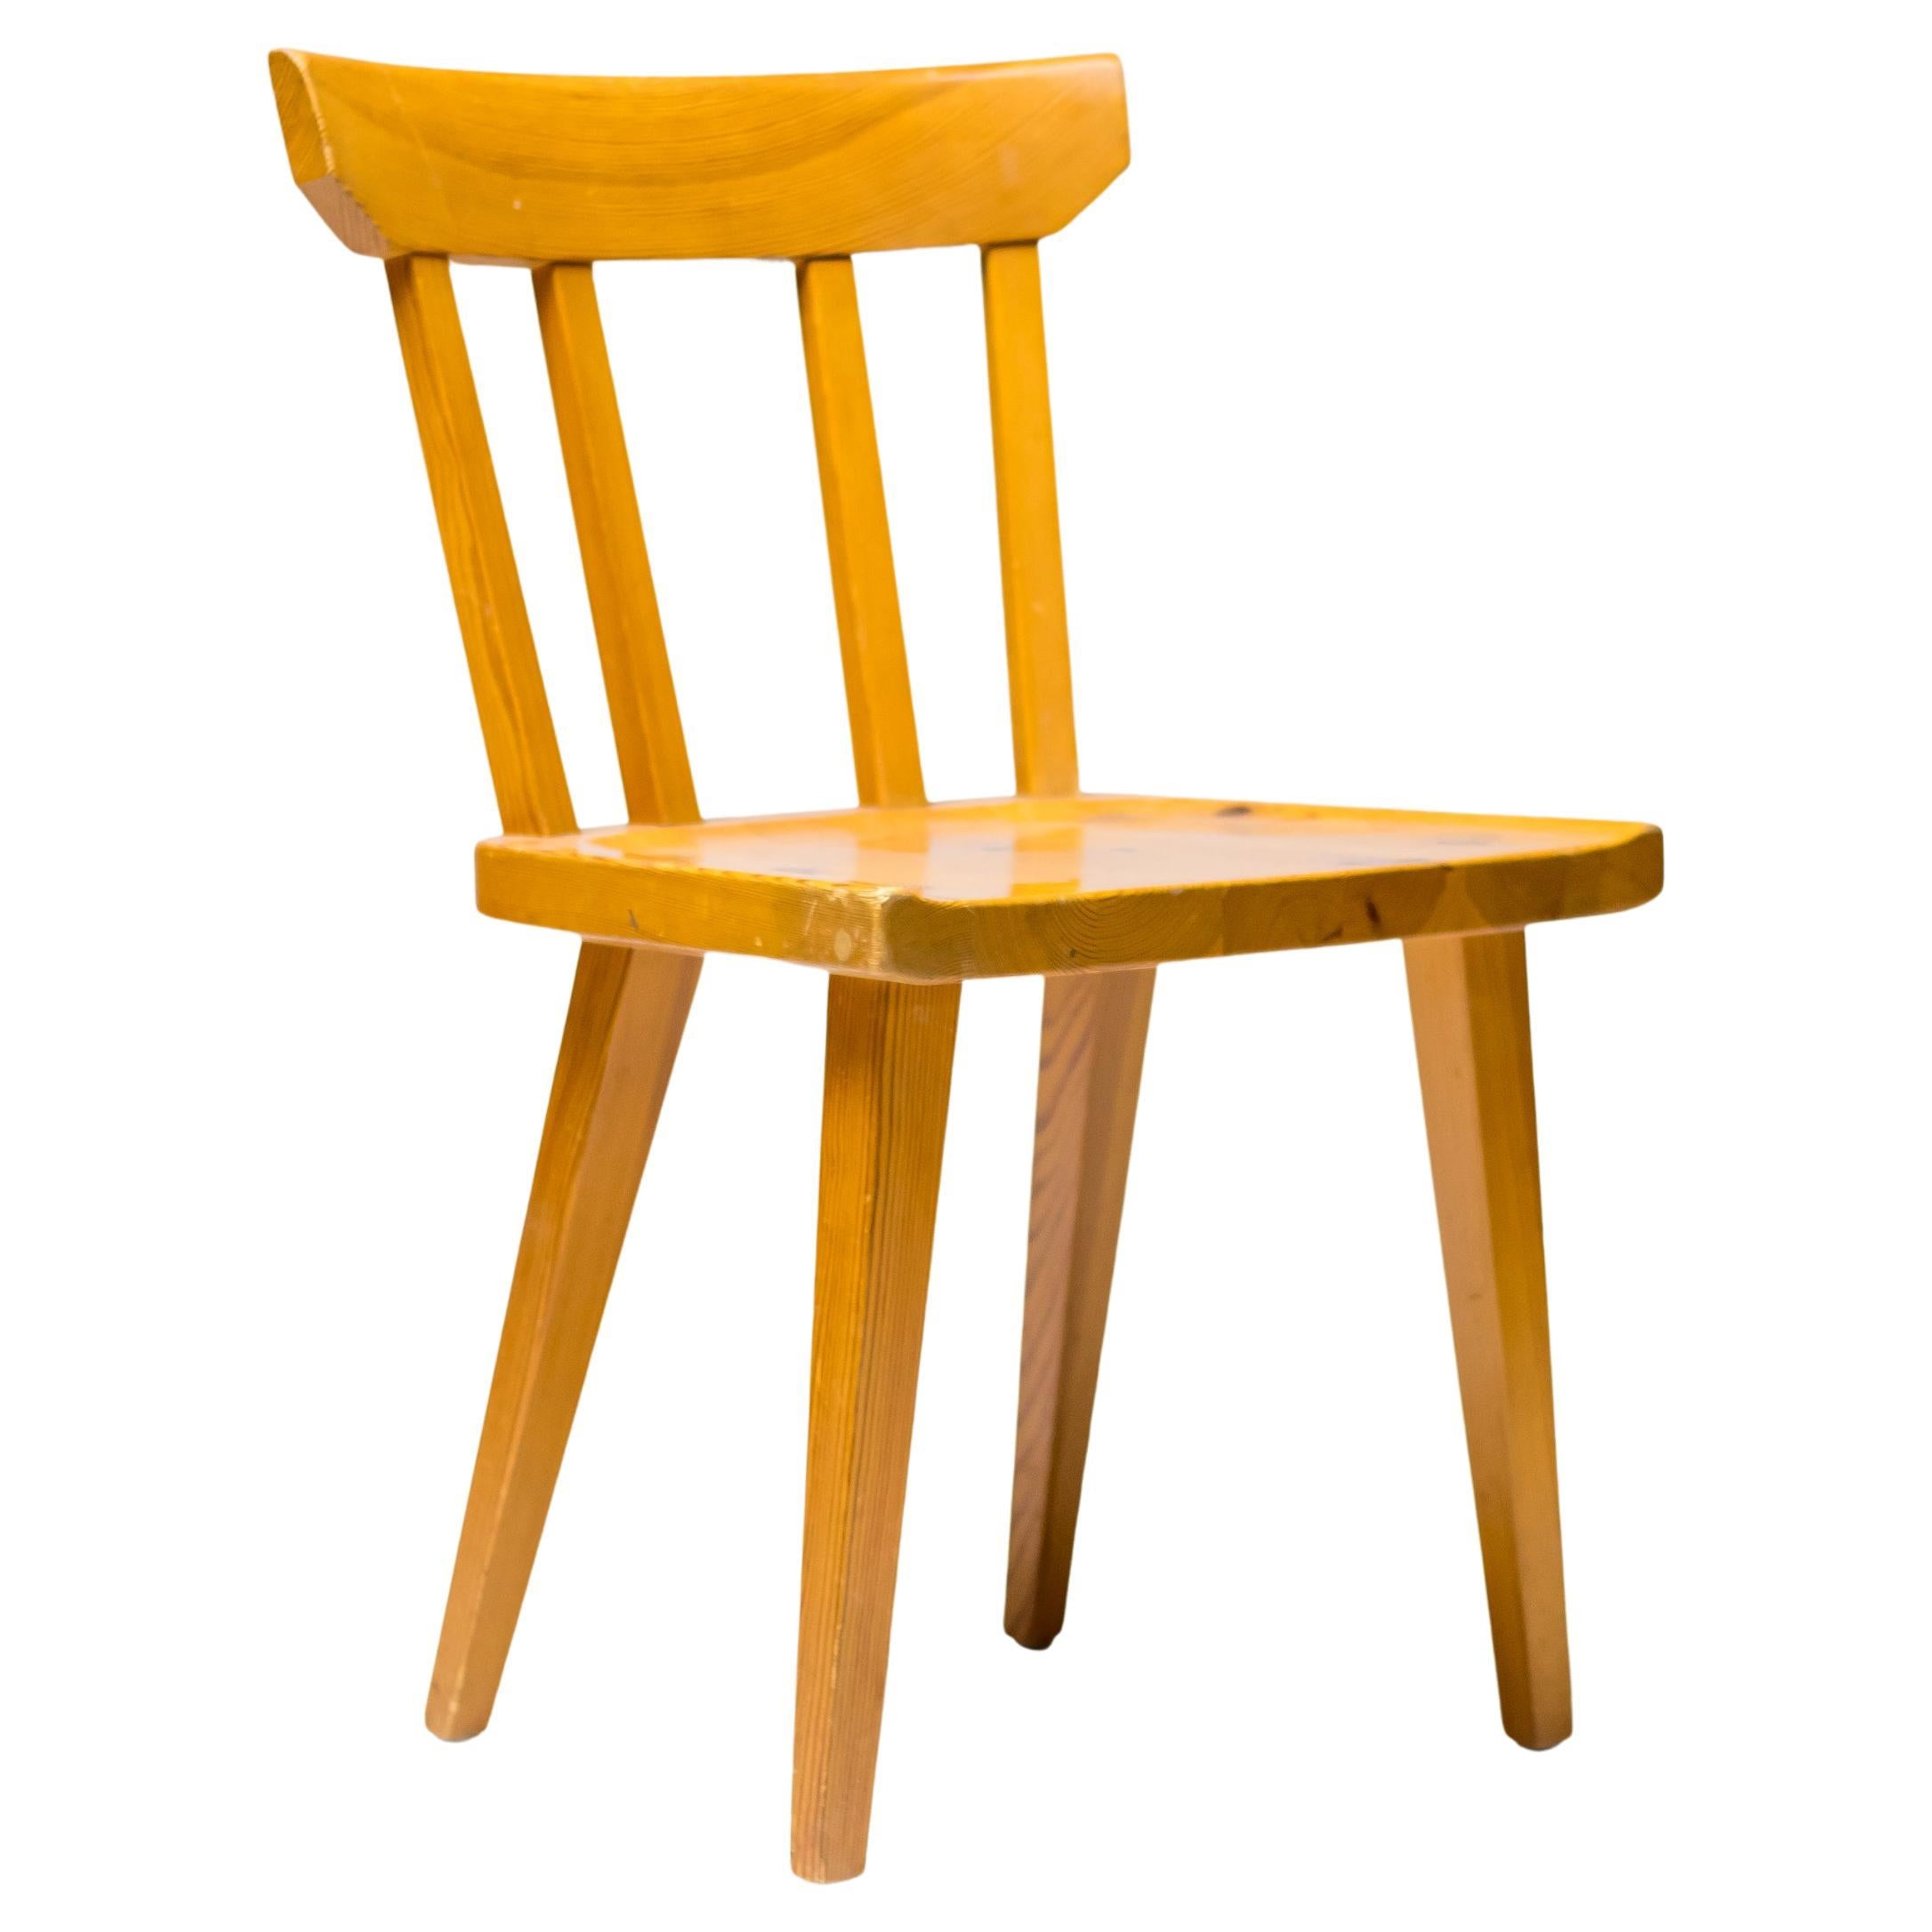 Six Oregon Pine Side Chairs by Roland Wilhelmsson